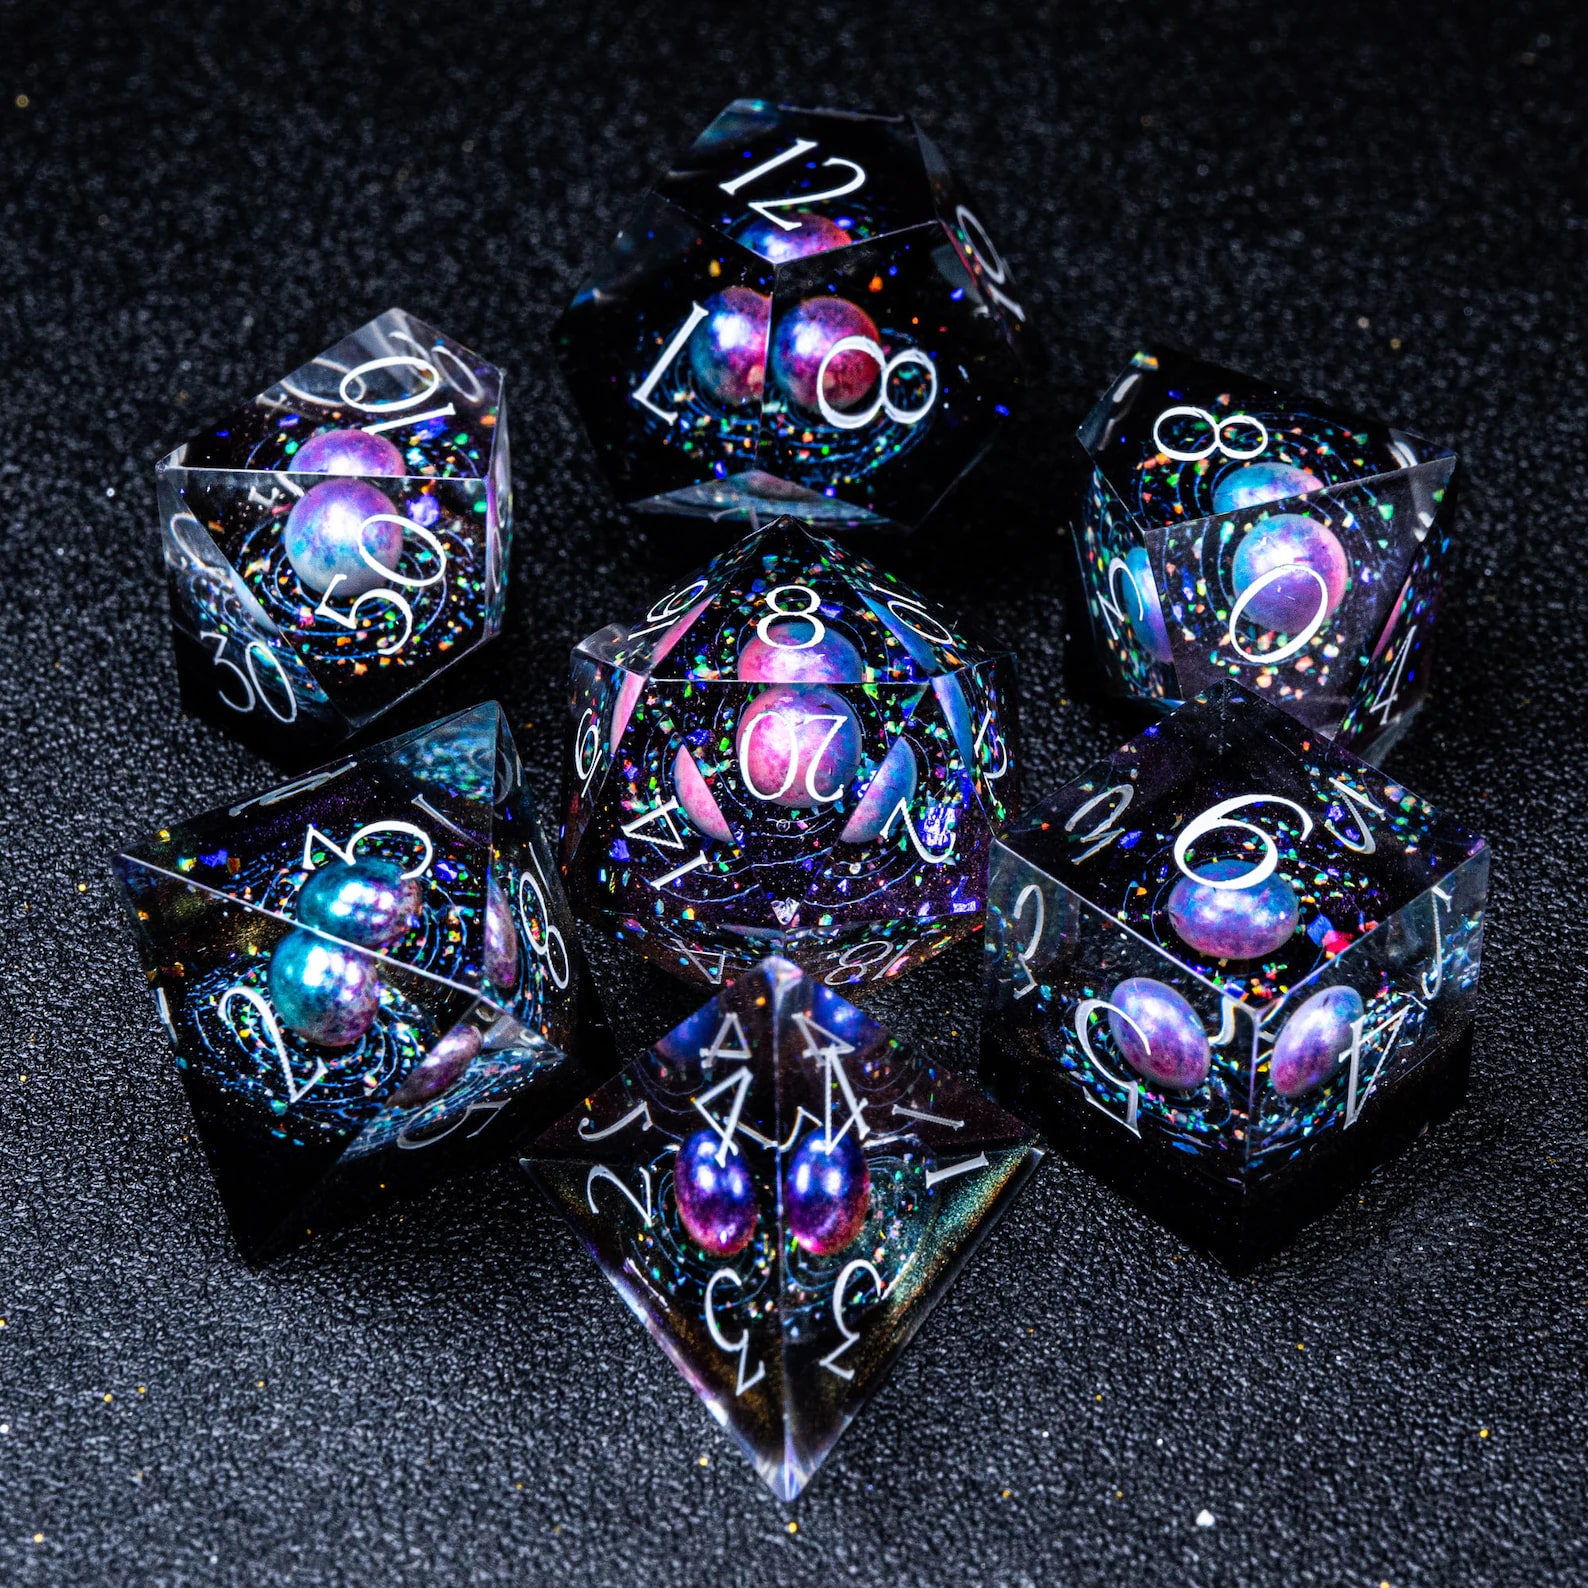 Clear resin dice with galaxies set inside, in jewel tones on black